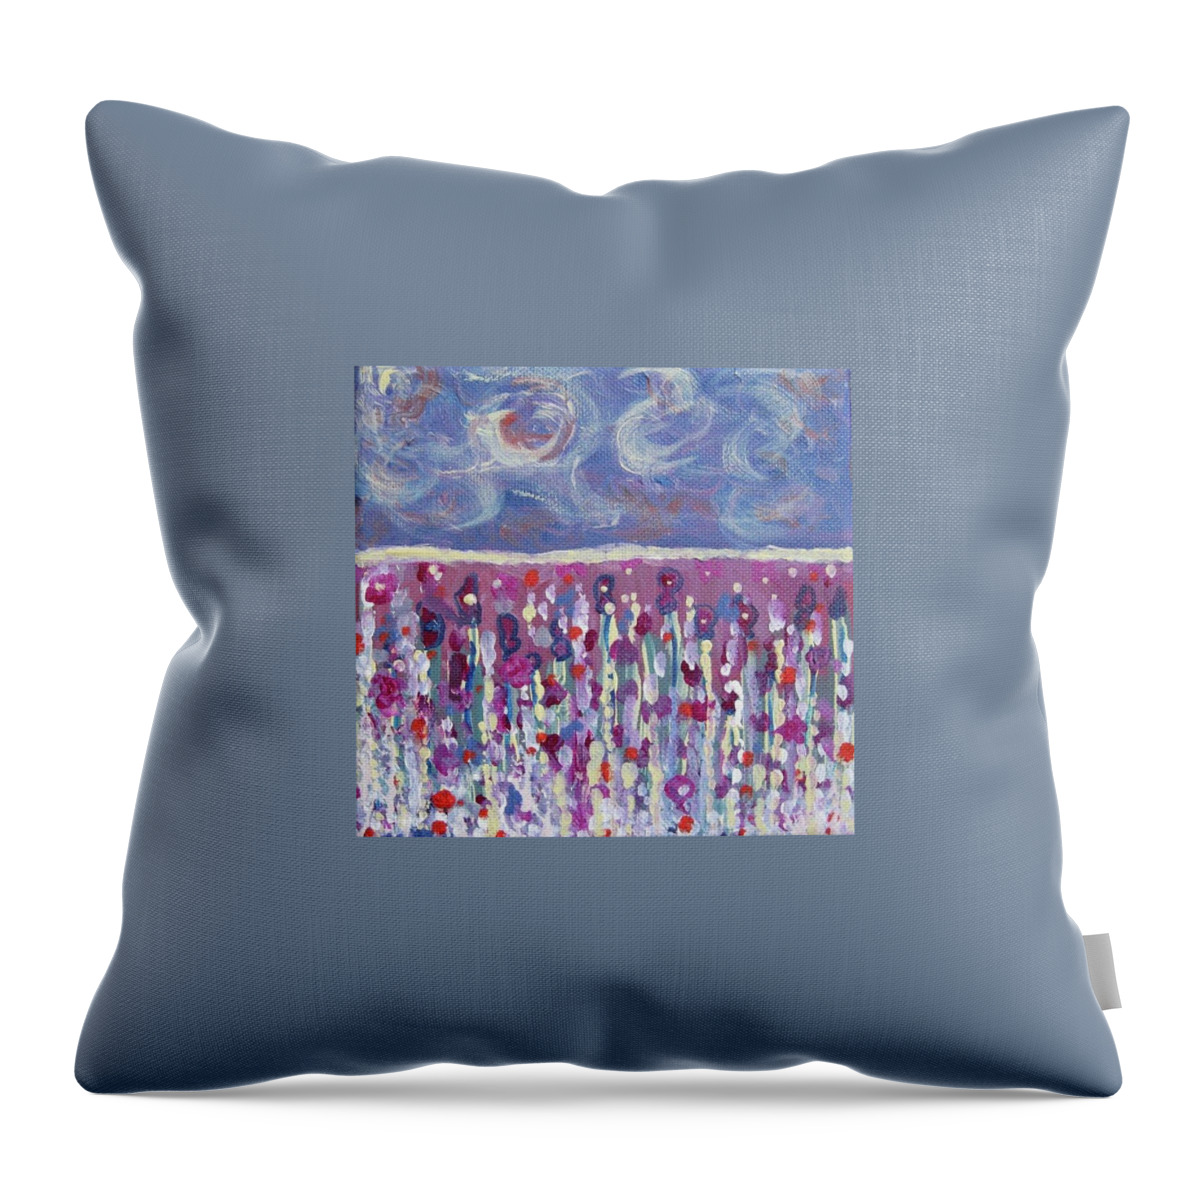 Abstract Landscape Throw Pillow featuring the painting Kimberly Iris's by Jacqui Hawk